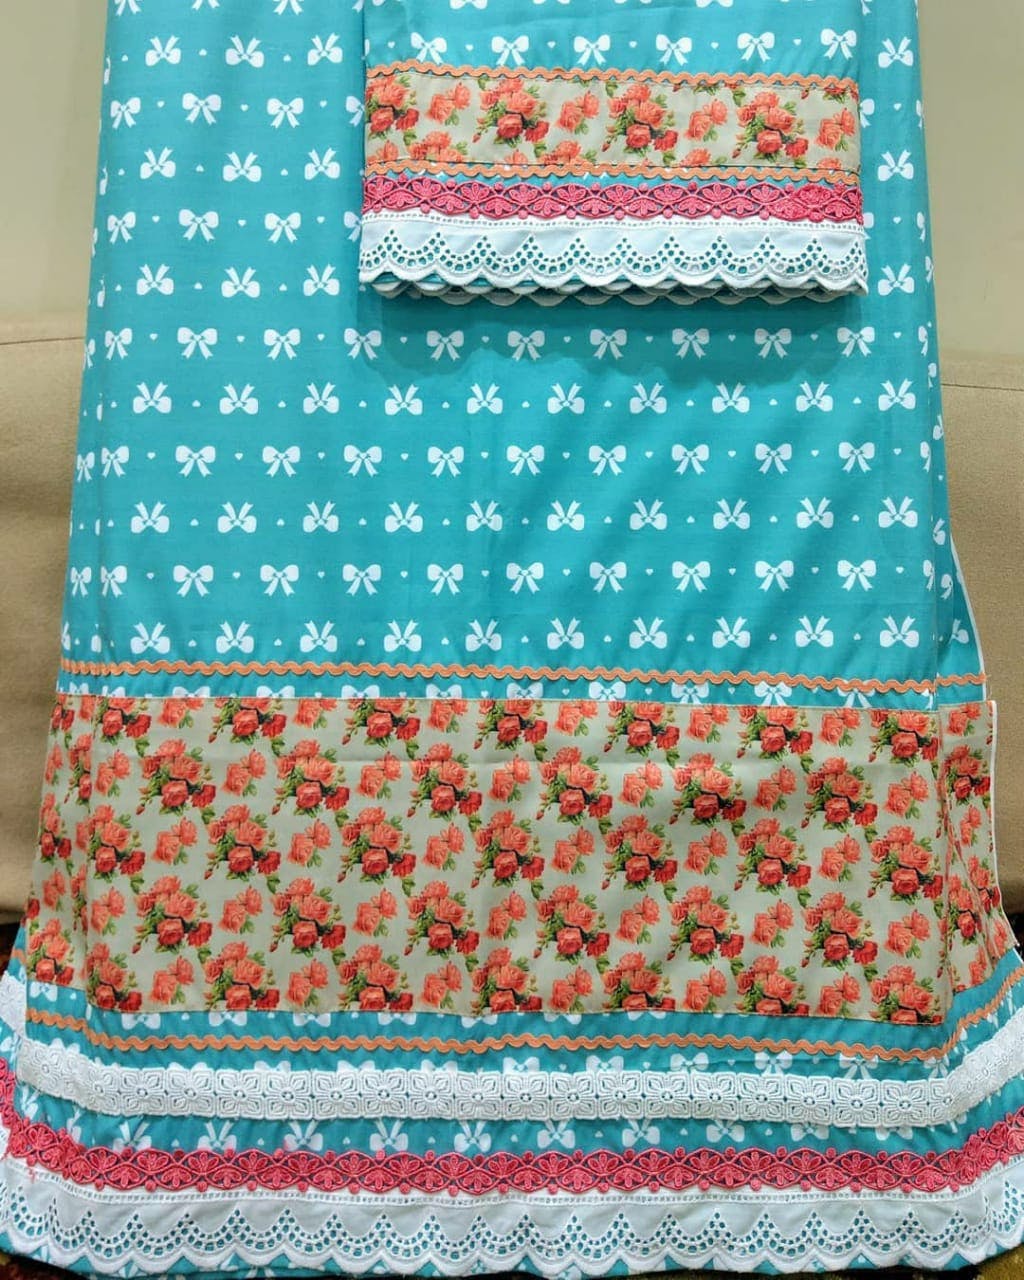 Aqua,Turquoise,Pink,Textile,Patchwork,Teal,Pattern,Pattern,Quilt,Turquoise